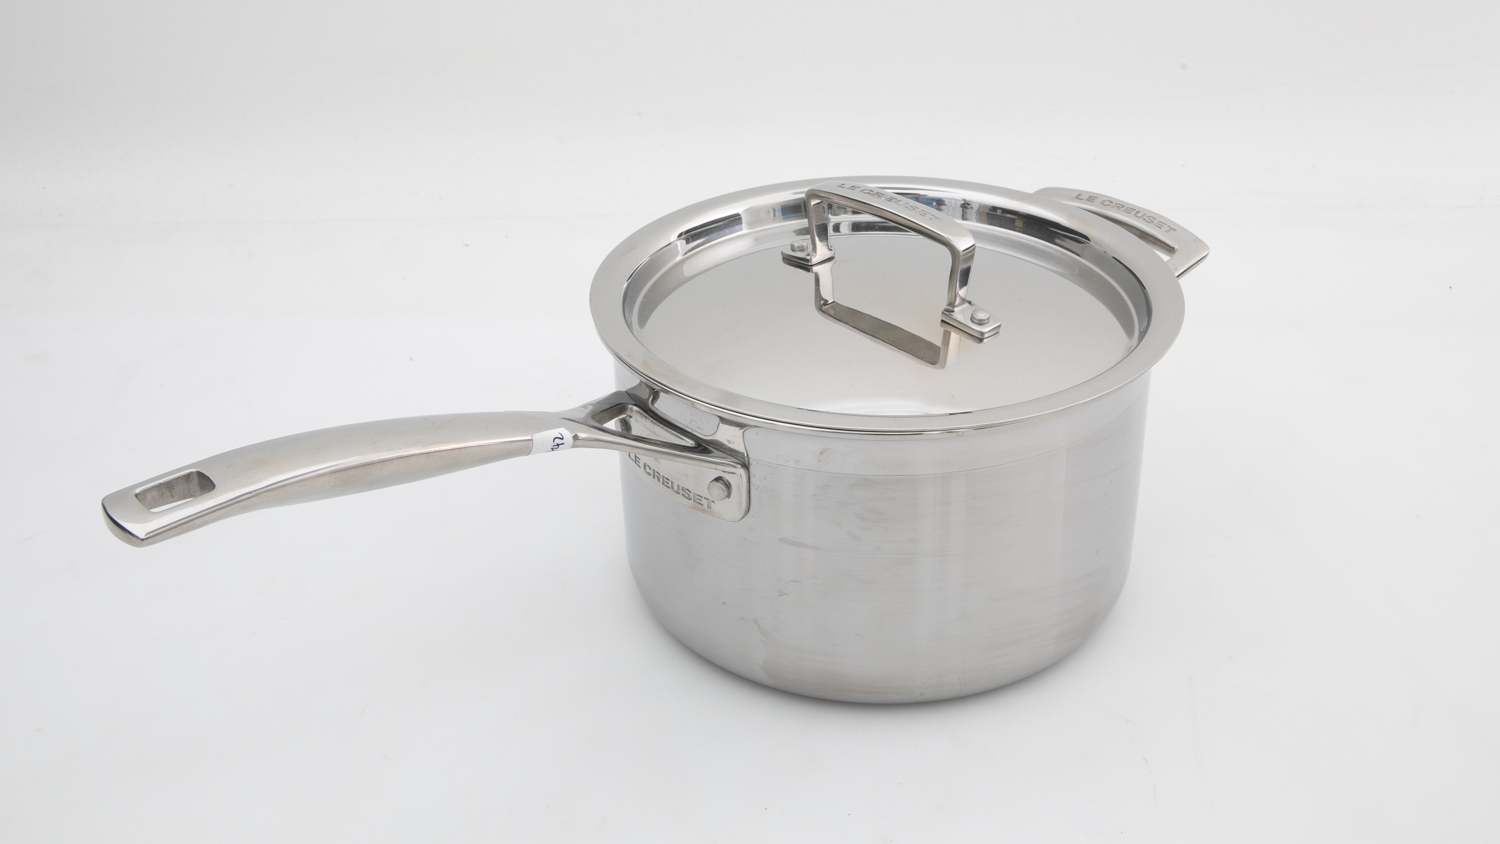 Le Creuset 3-ply Stainless Steel Saucepan 20cm carousel image